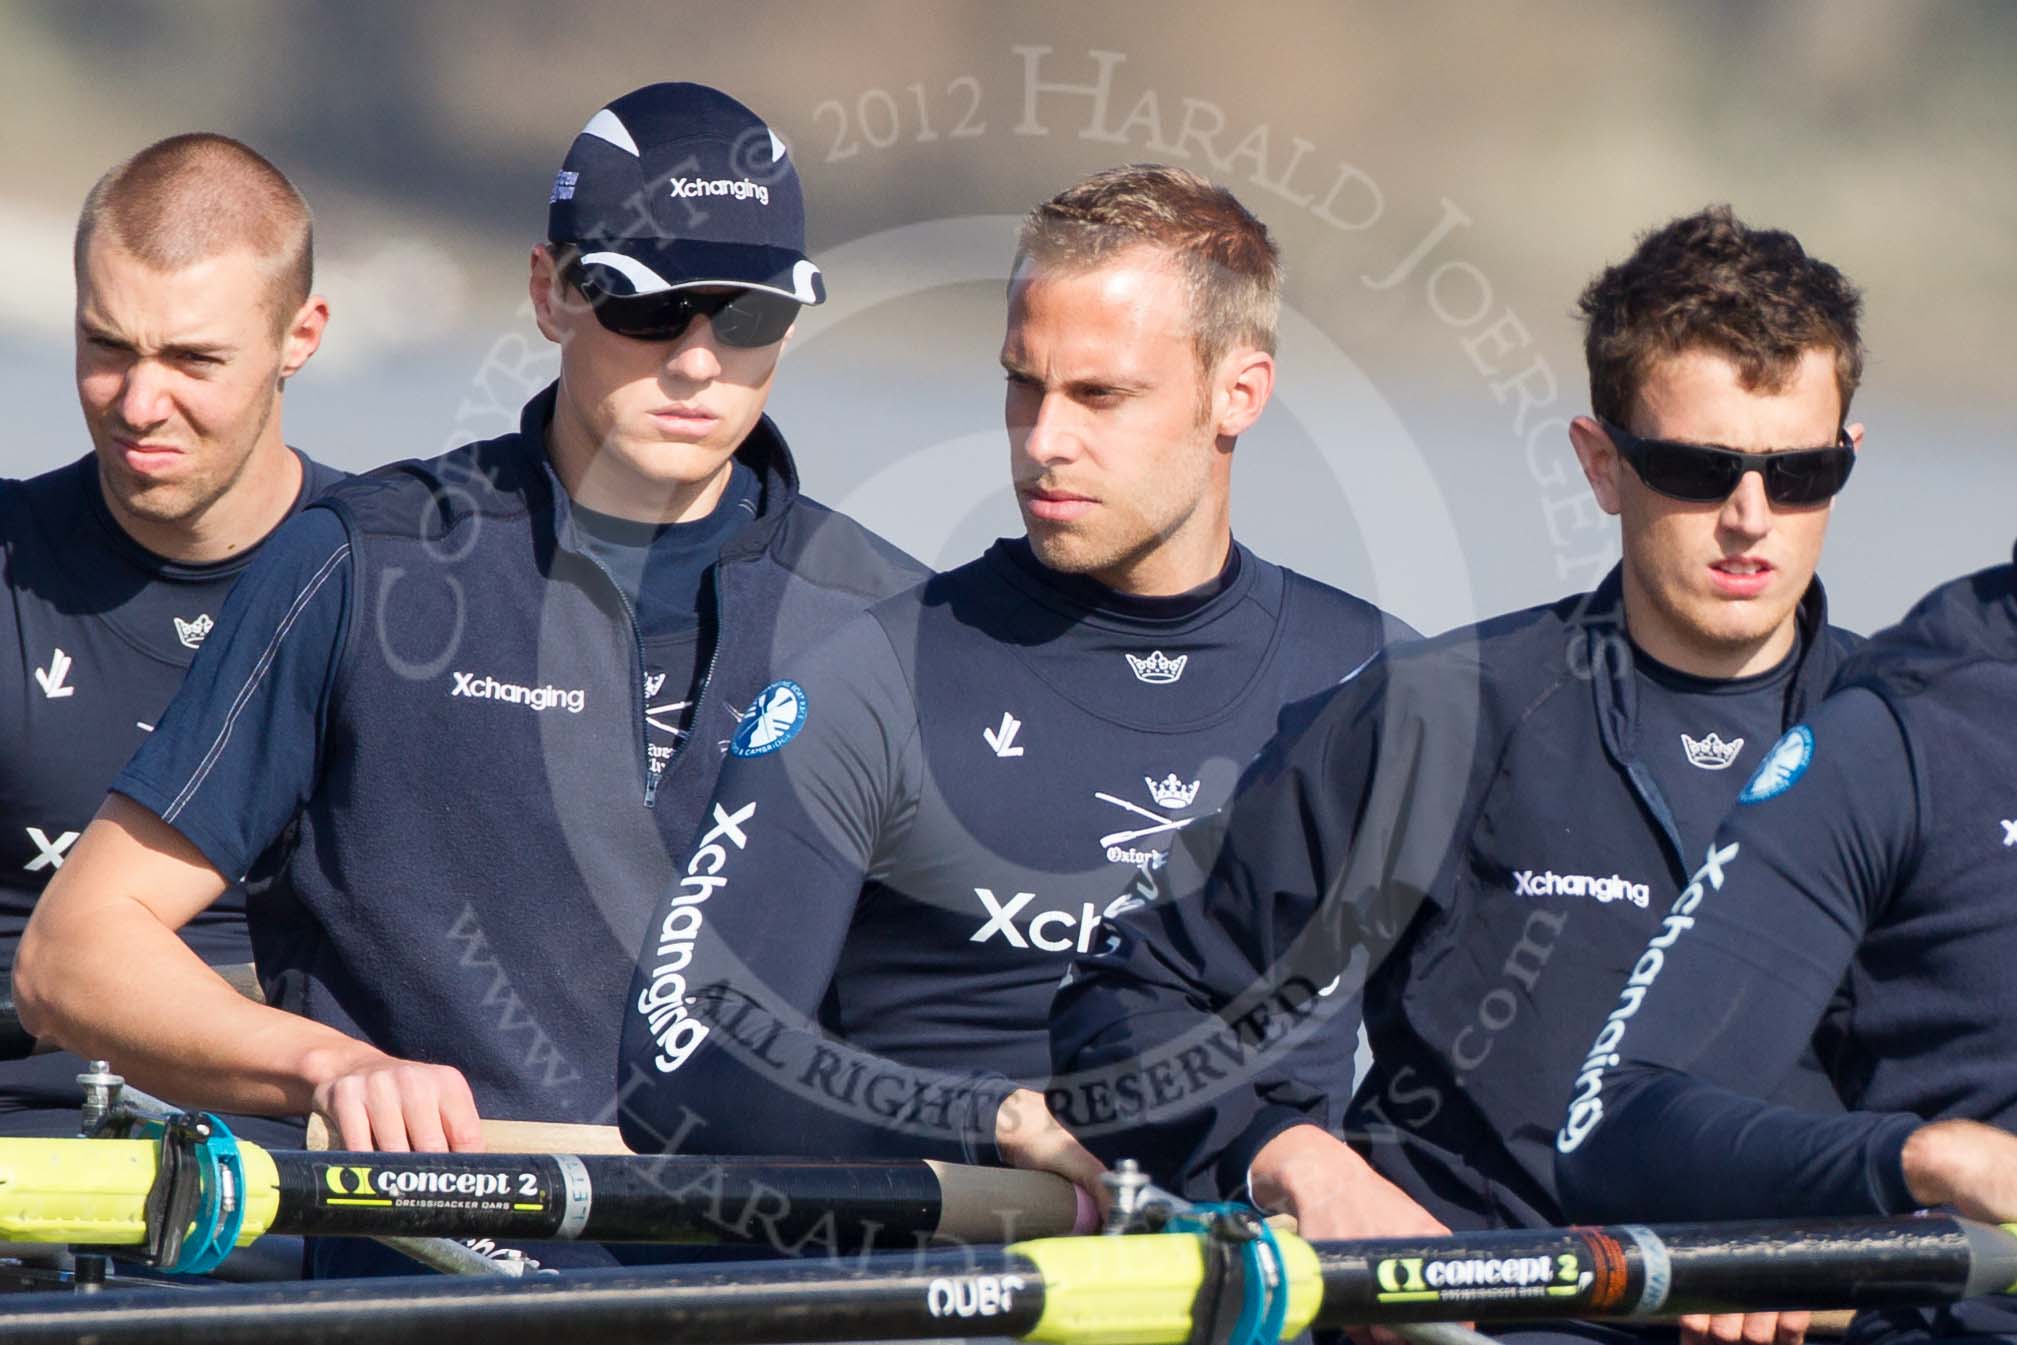 The Boat Race season 2012 - Tideway Week (Tuesday).




on 03 April 2012 at 10:12, image #14